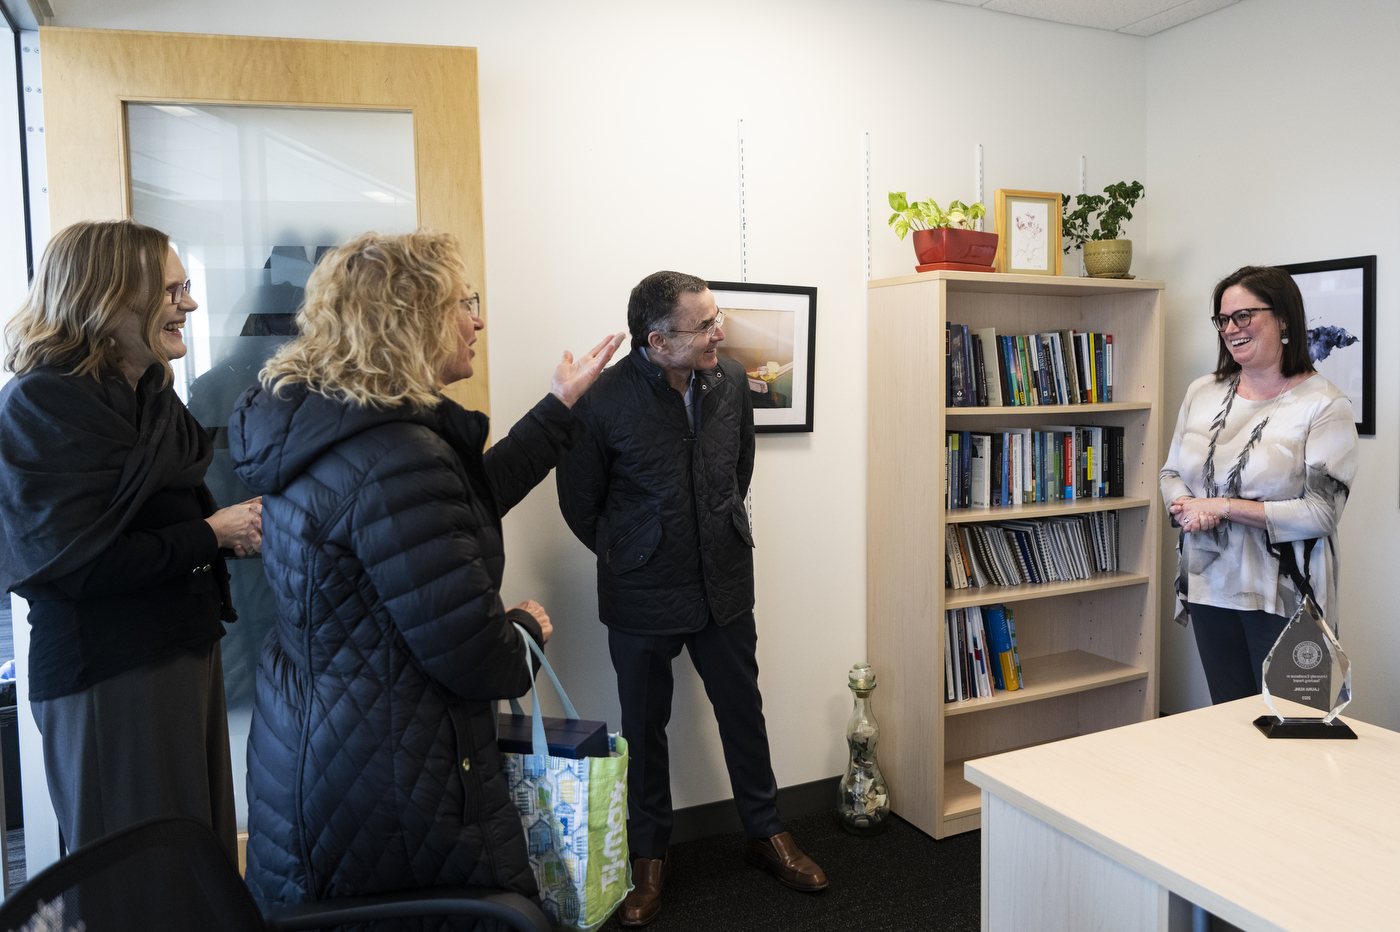 Professor Laura Kuhl being surprised in her office